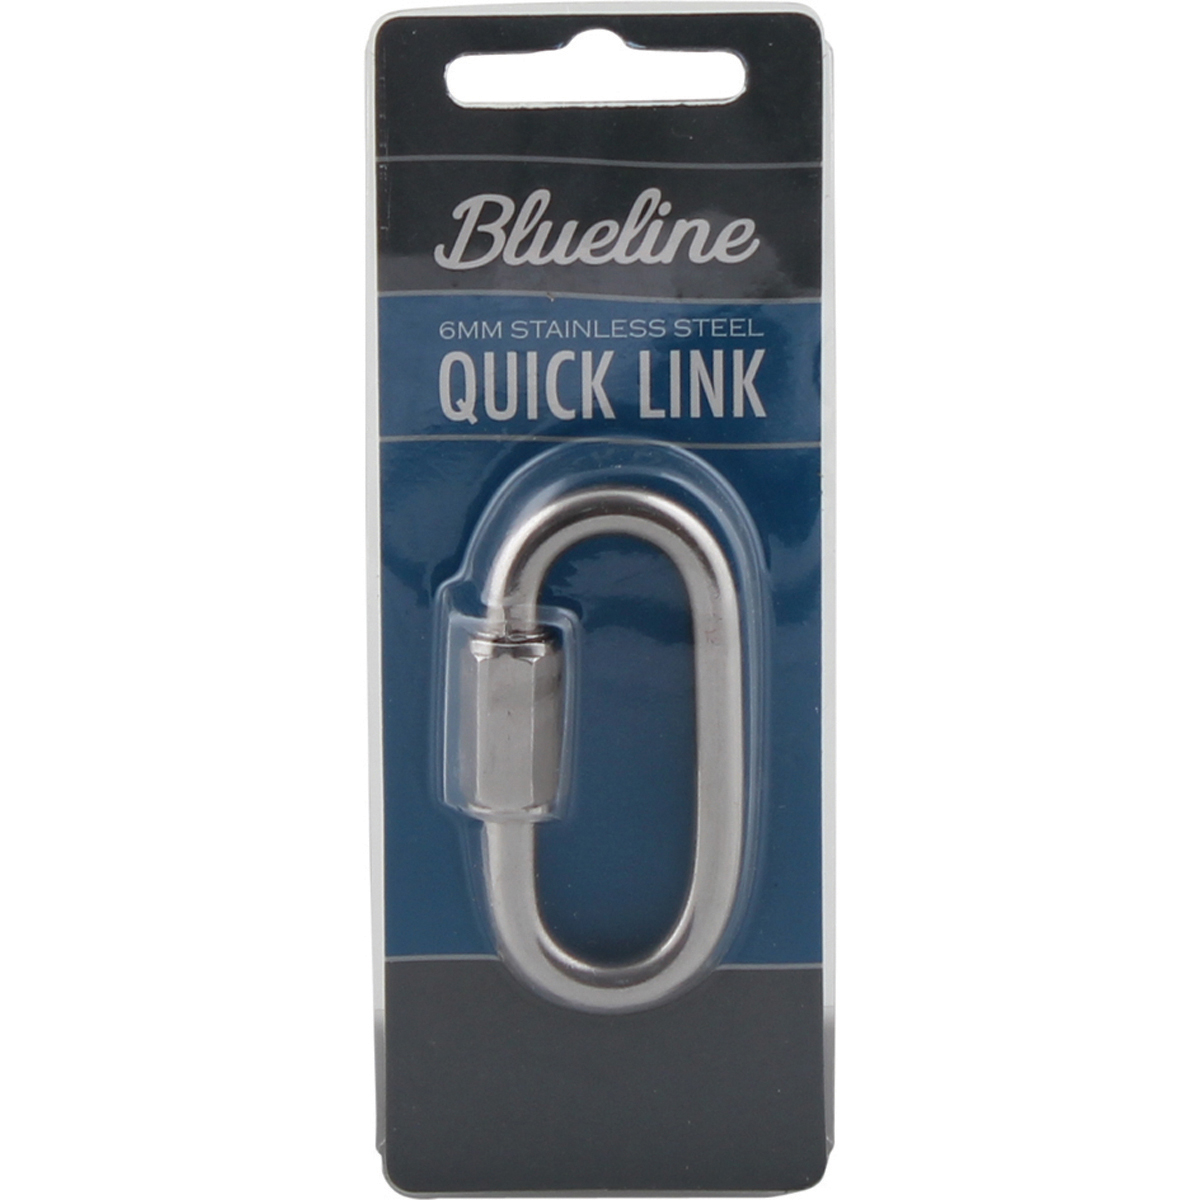 Blueline Stainless Steel Quick Link 6mm